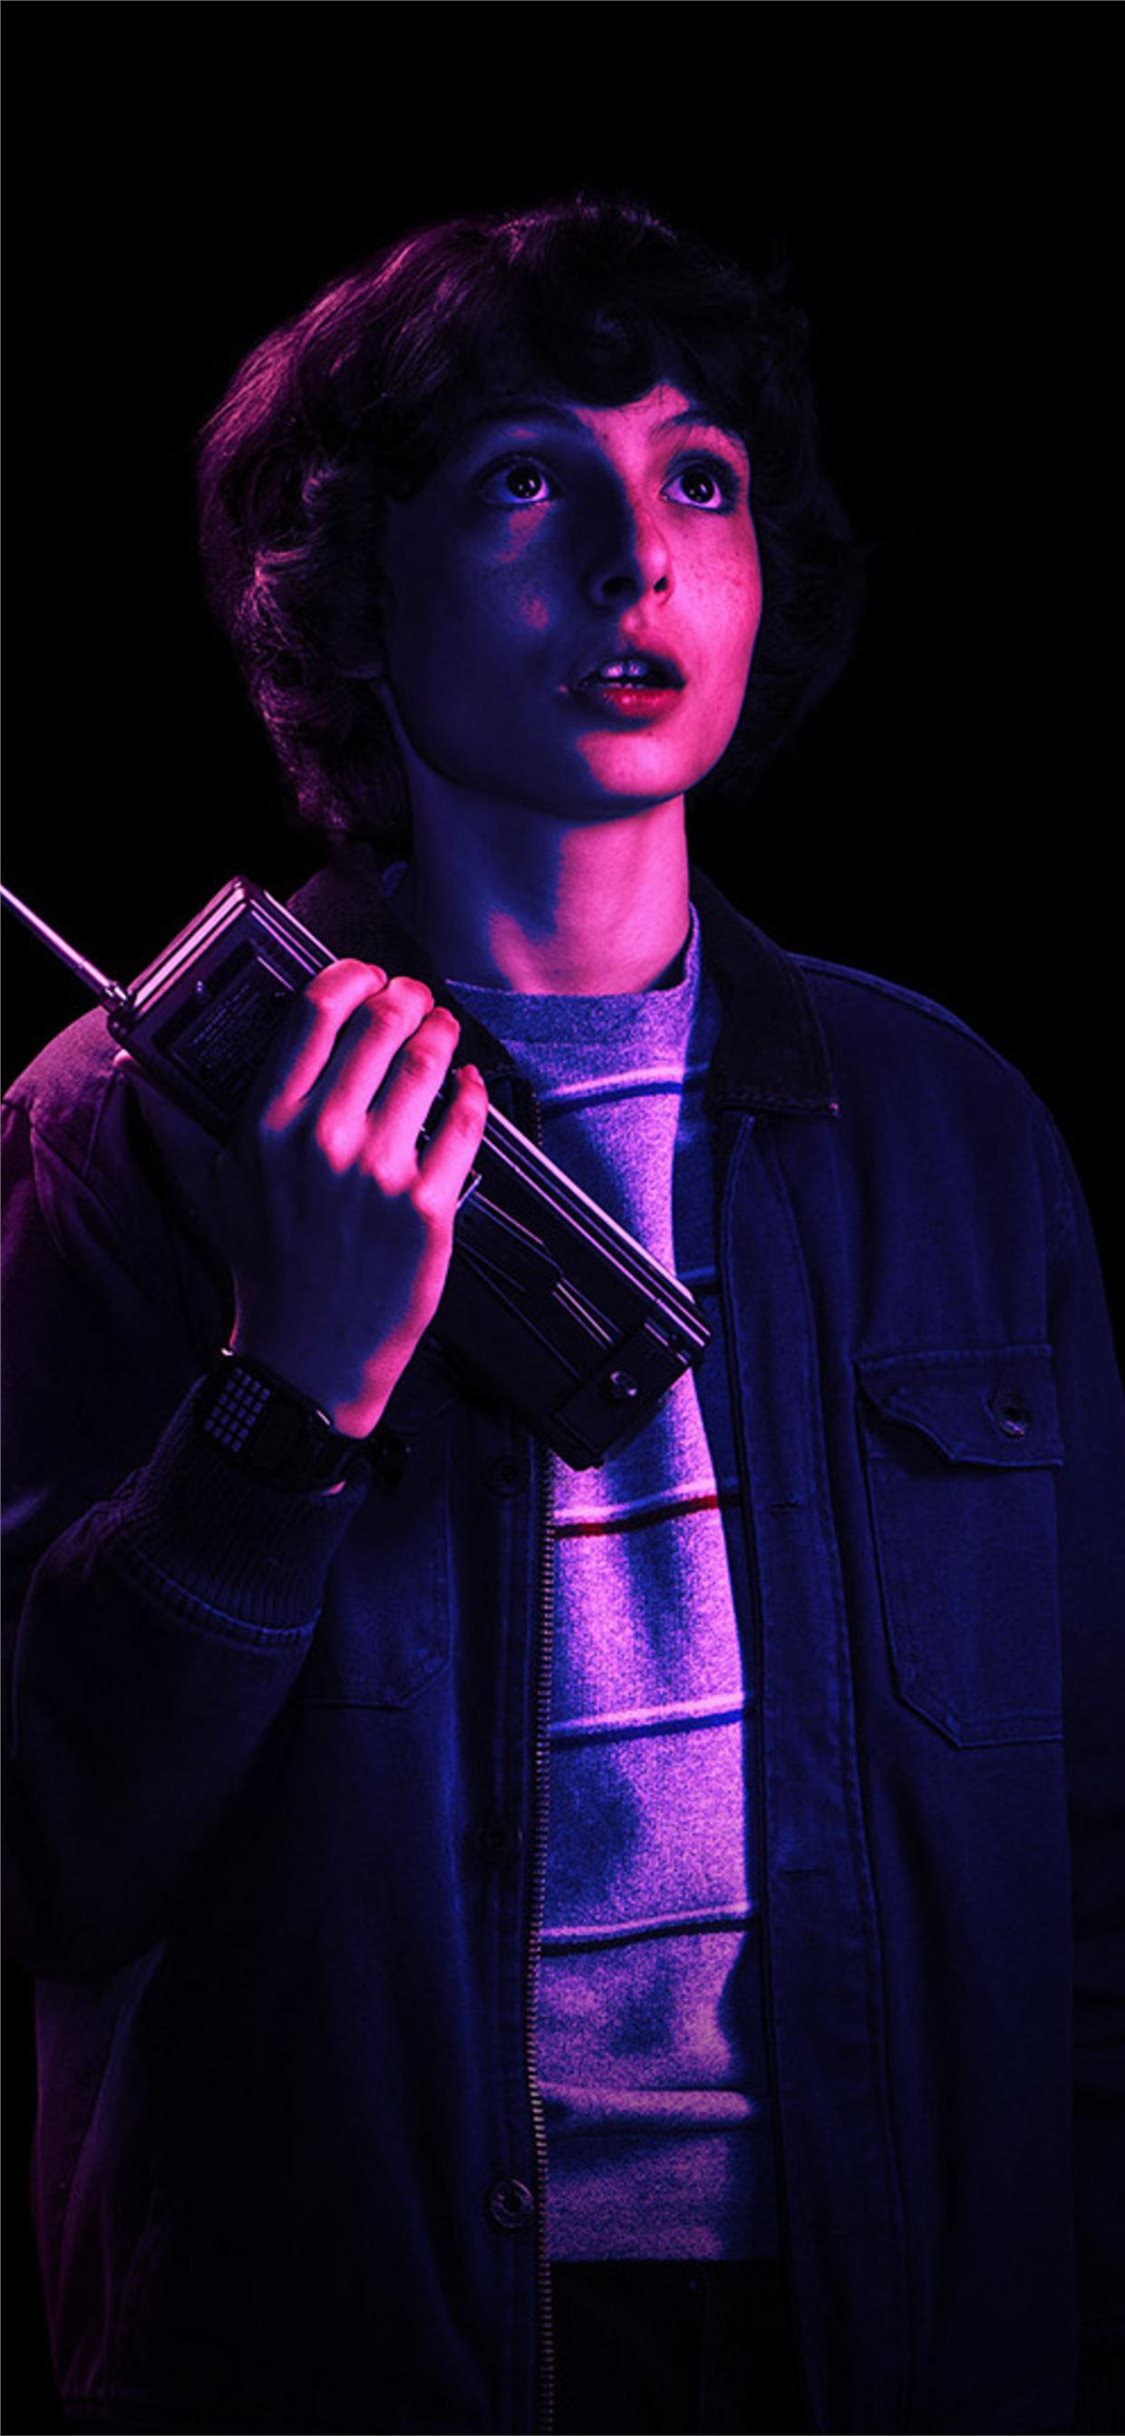 1080x1920  1080x1920 eleven stranger things stranger things tv shows  hd 5k for Iphone 6 7 8 wallpaper  Coolwallpapersme